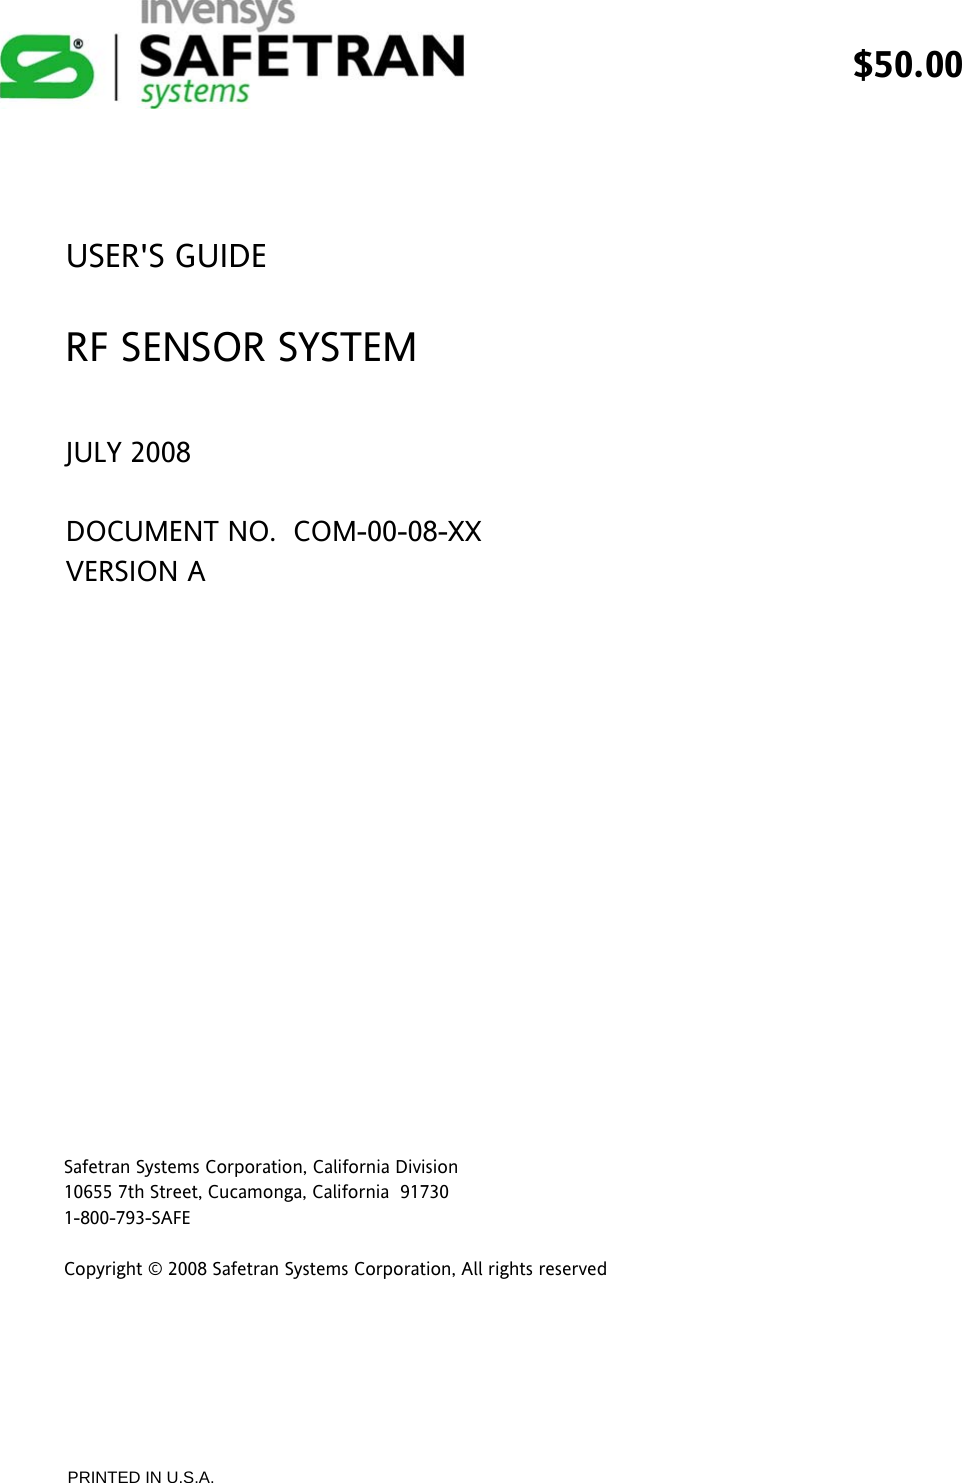  $50.00                  PRINTED IN U.S.A.     USER&apos;S GUIDE  RF SENSOR SYSTEM  JULY 2008  DOCUMENT NO.  COM-00-08-XX VERSION A                   Safetran Systems Corporation, California Division 10655 7th Street, Cucamonga, California  91730  1-800-793-SAFE    Copyright © 2008 Safetran Systems Corporation, All rights reserved 